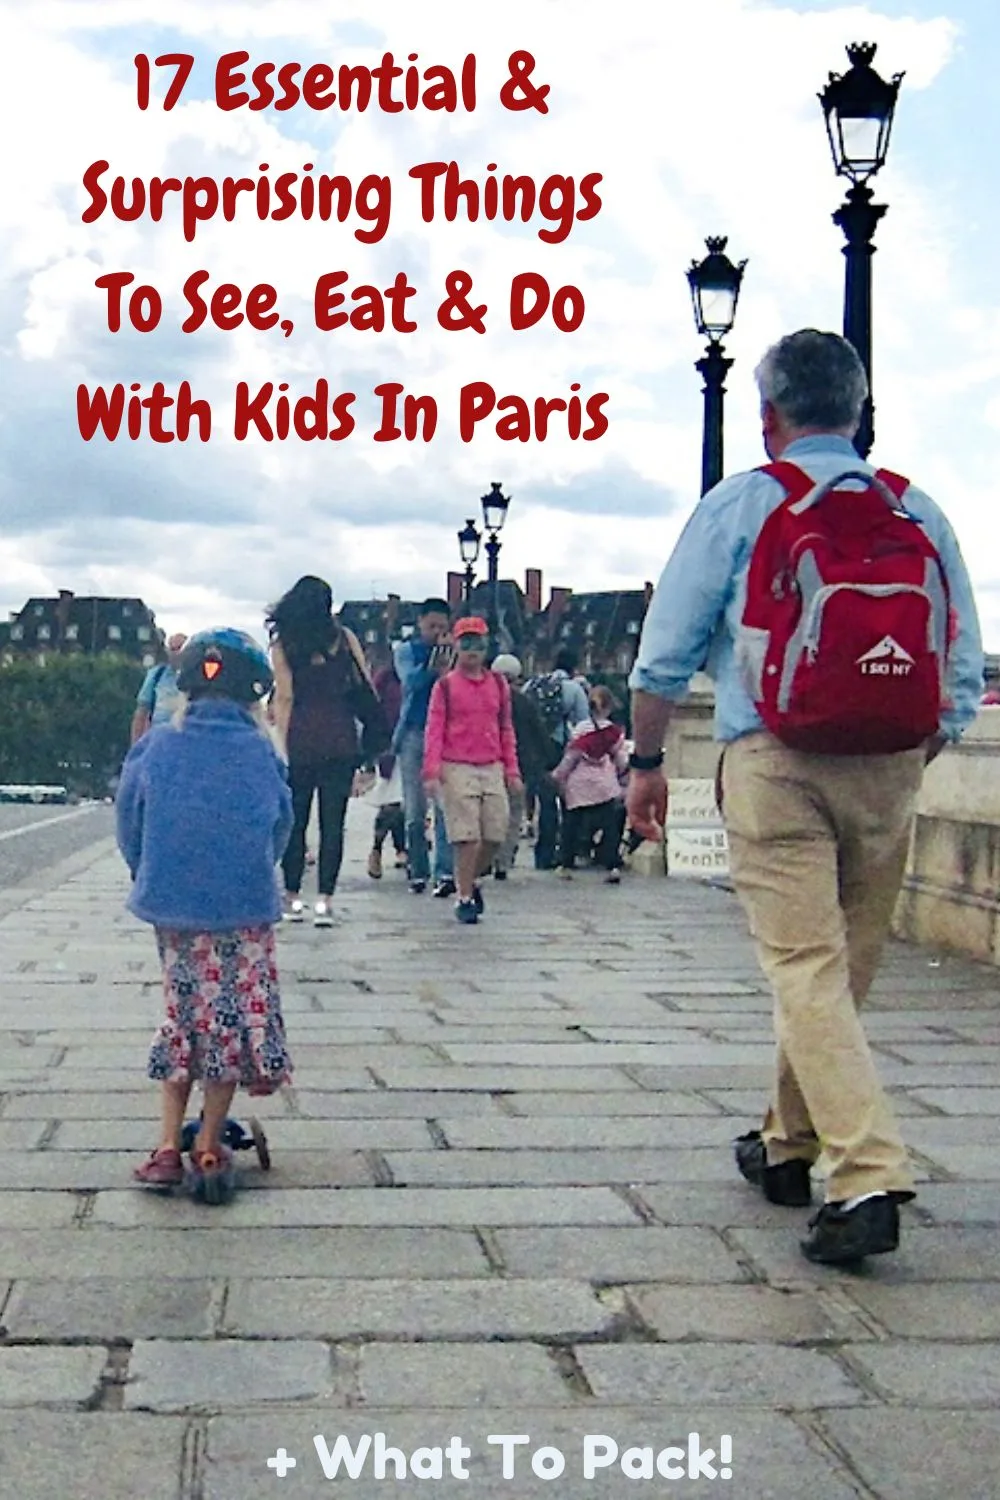 paris has more kid-friendly things to see, do & eat than you might expect. here are the museums, parks, foods and even churches  my family loved on our visit.